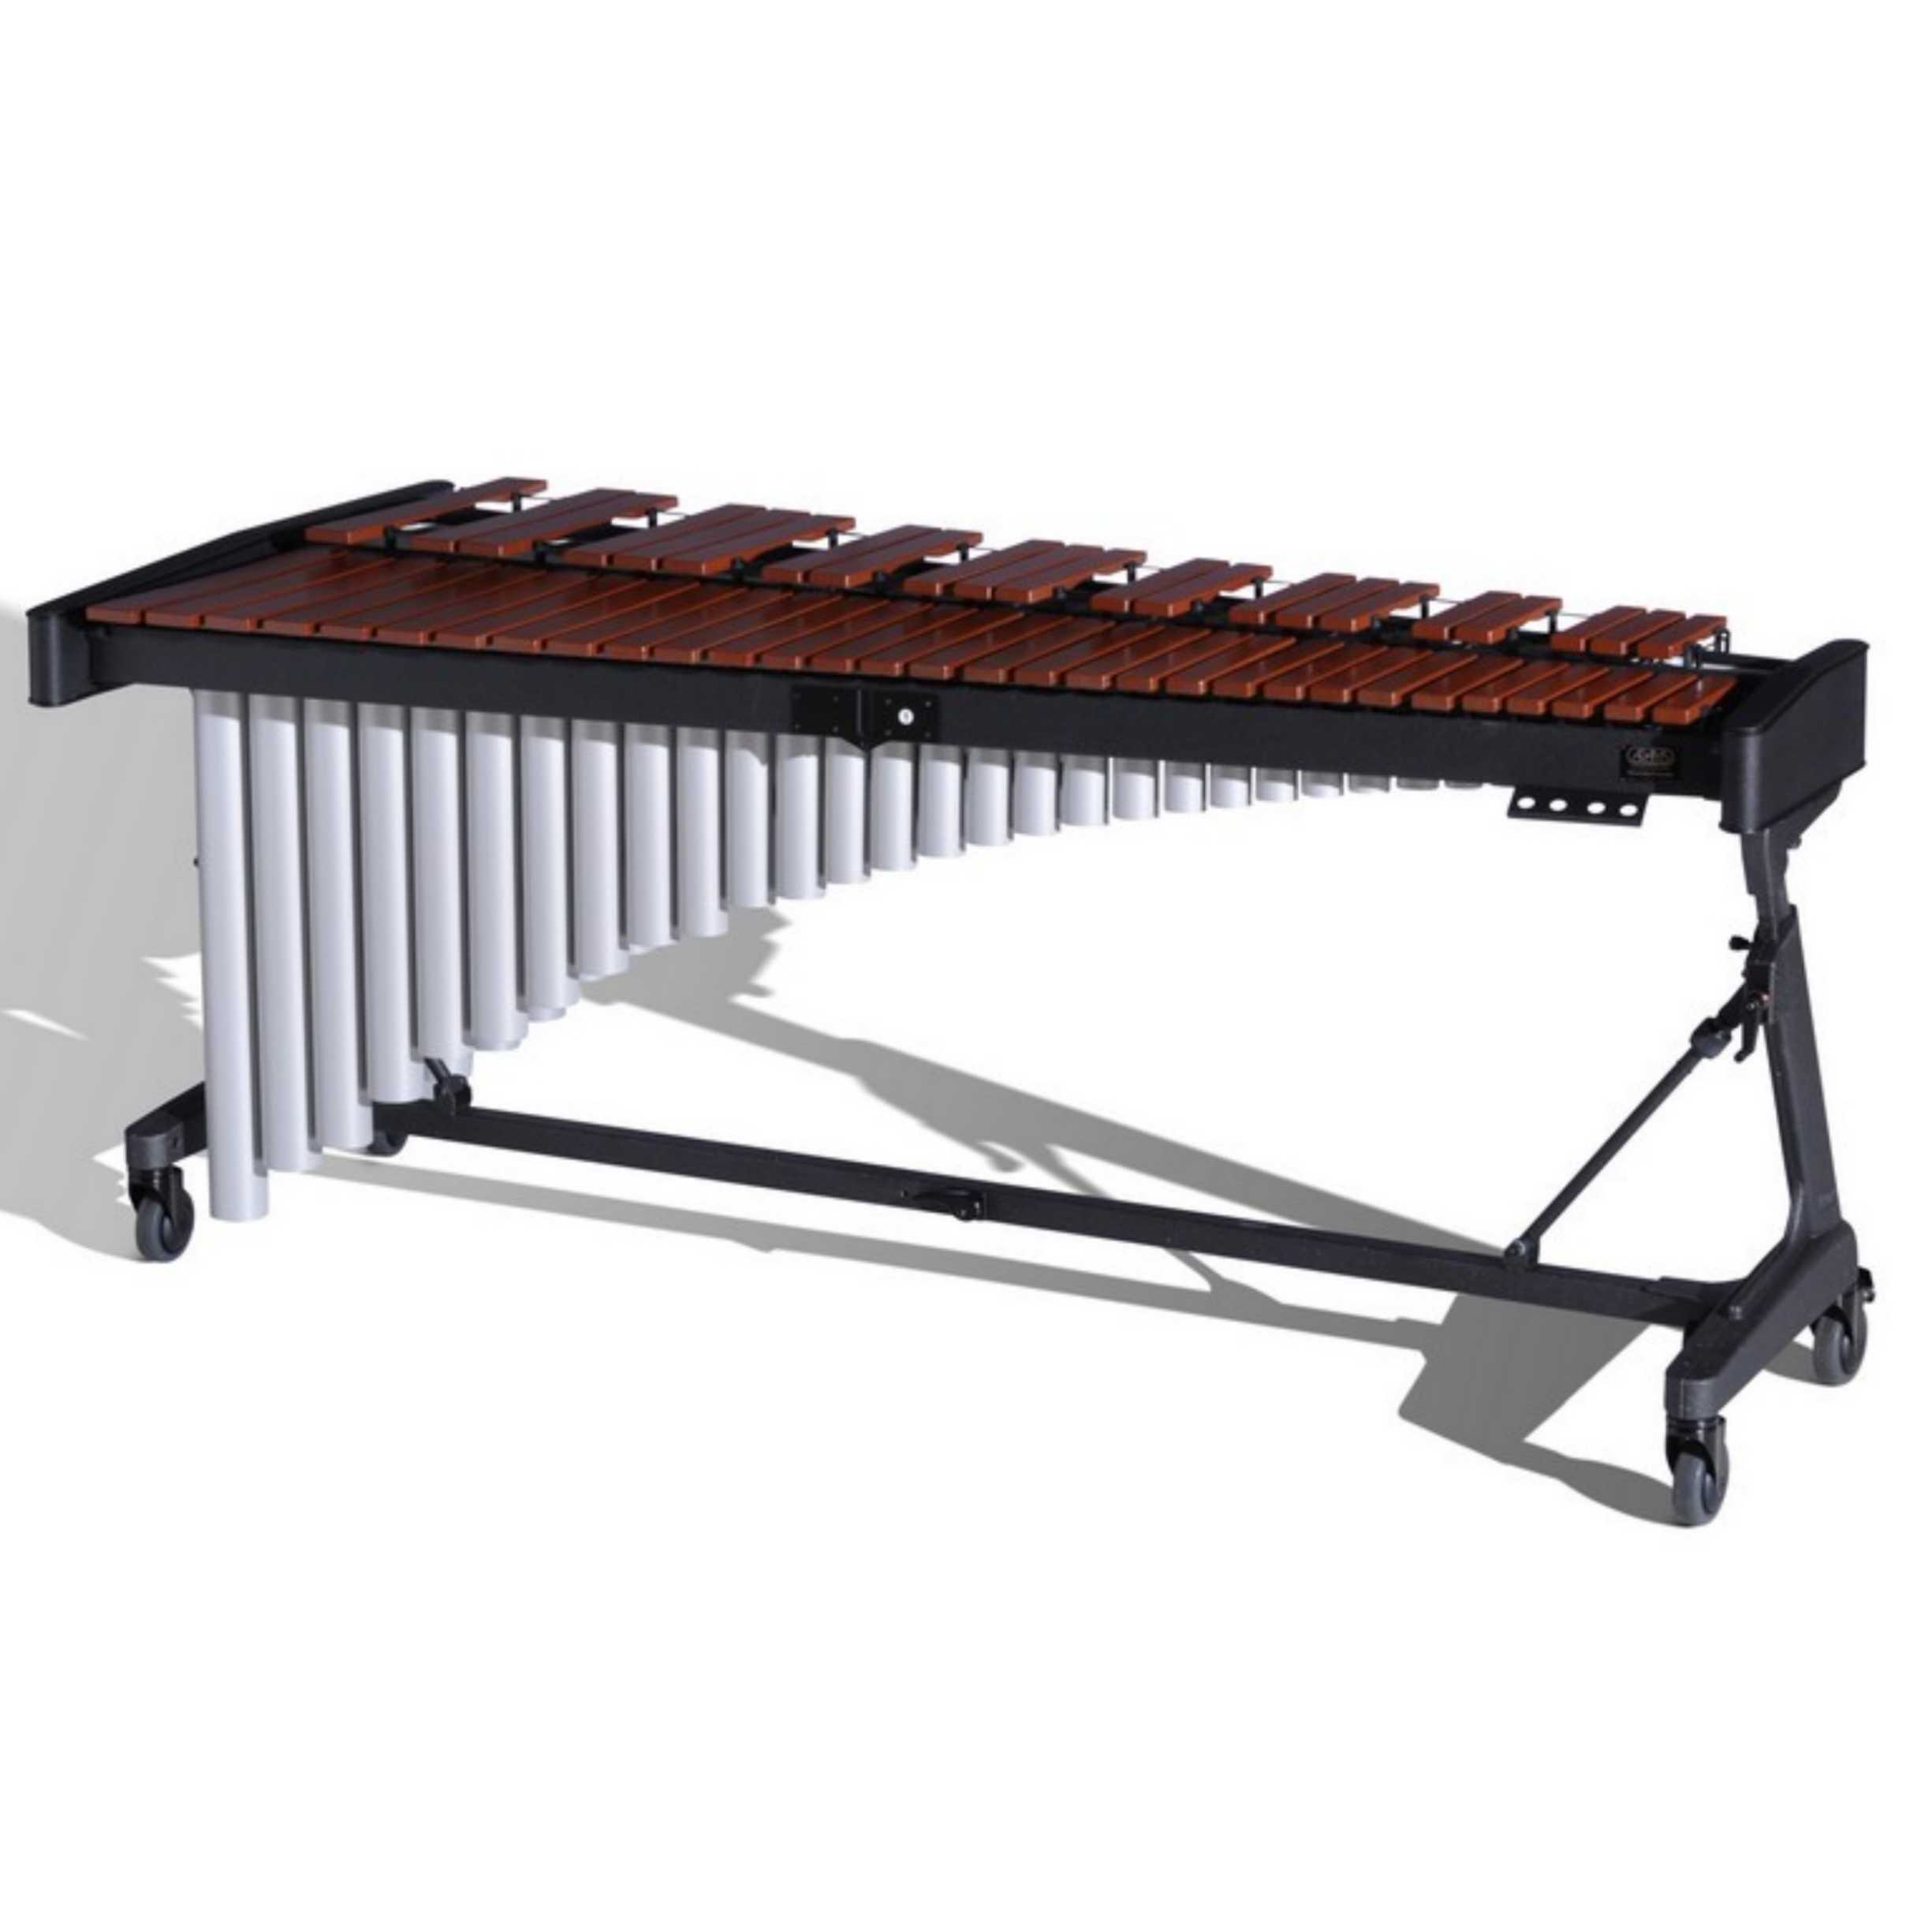 Adams Concert 4.3oct Synthetic Marimba with Apex Frame